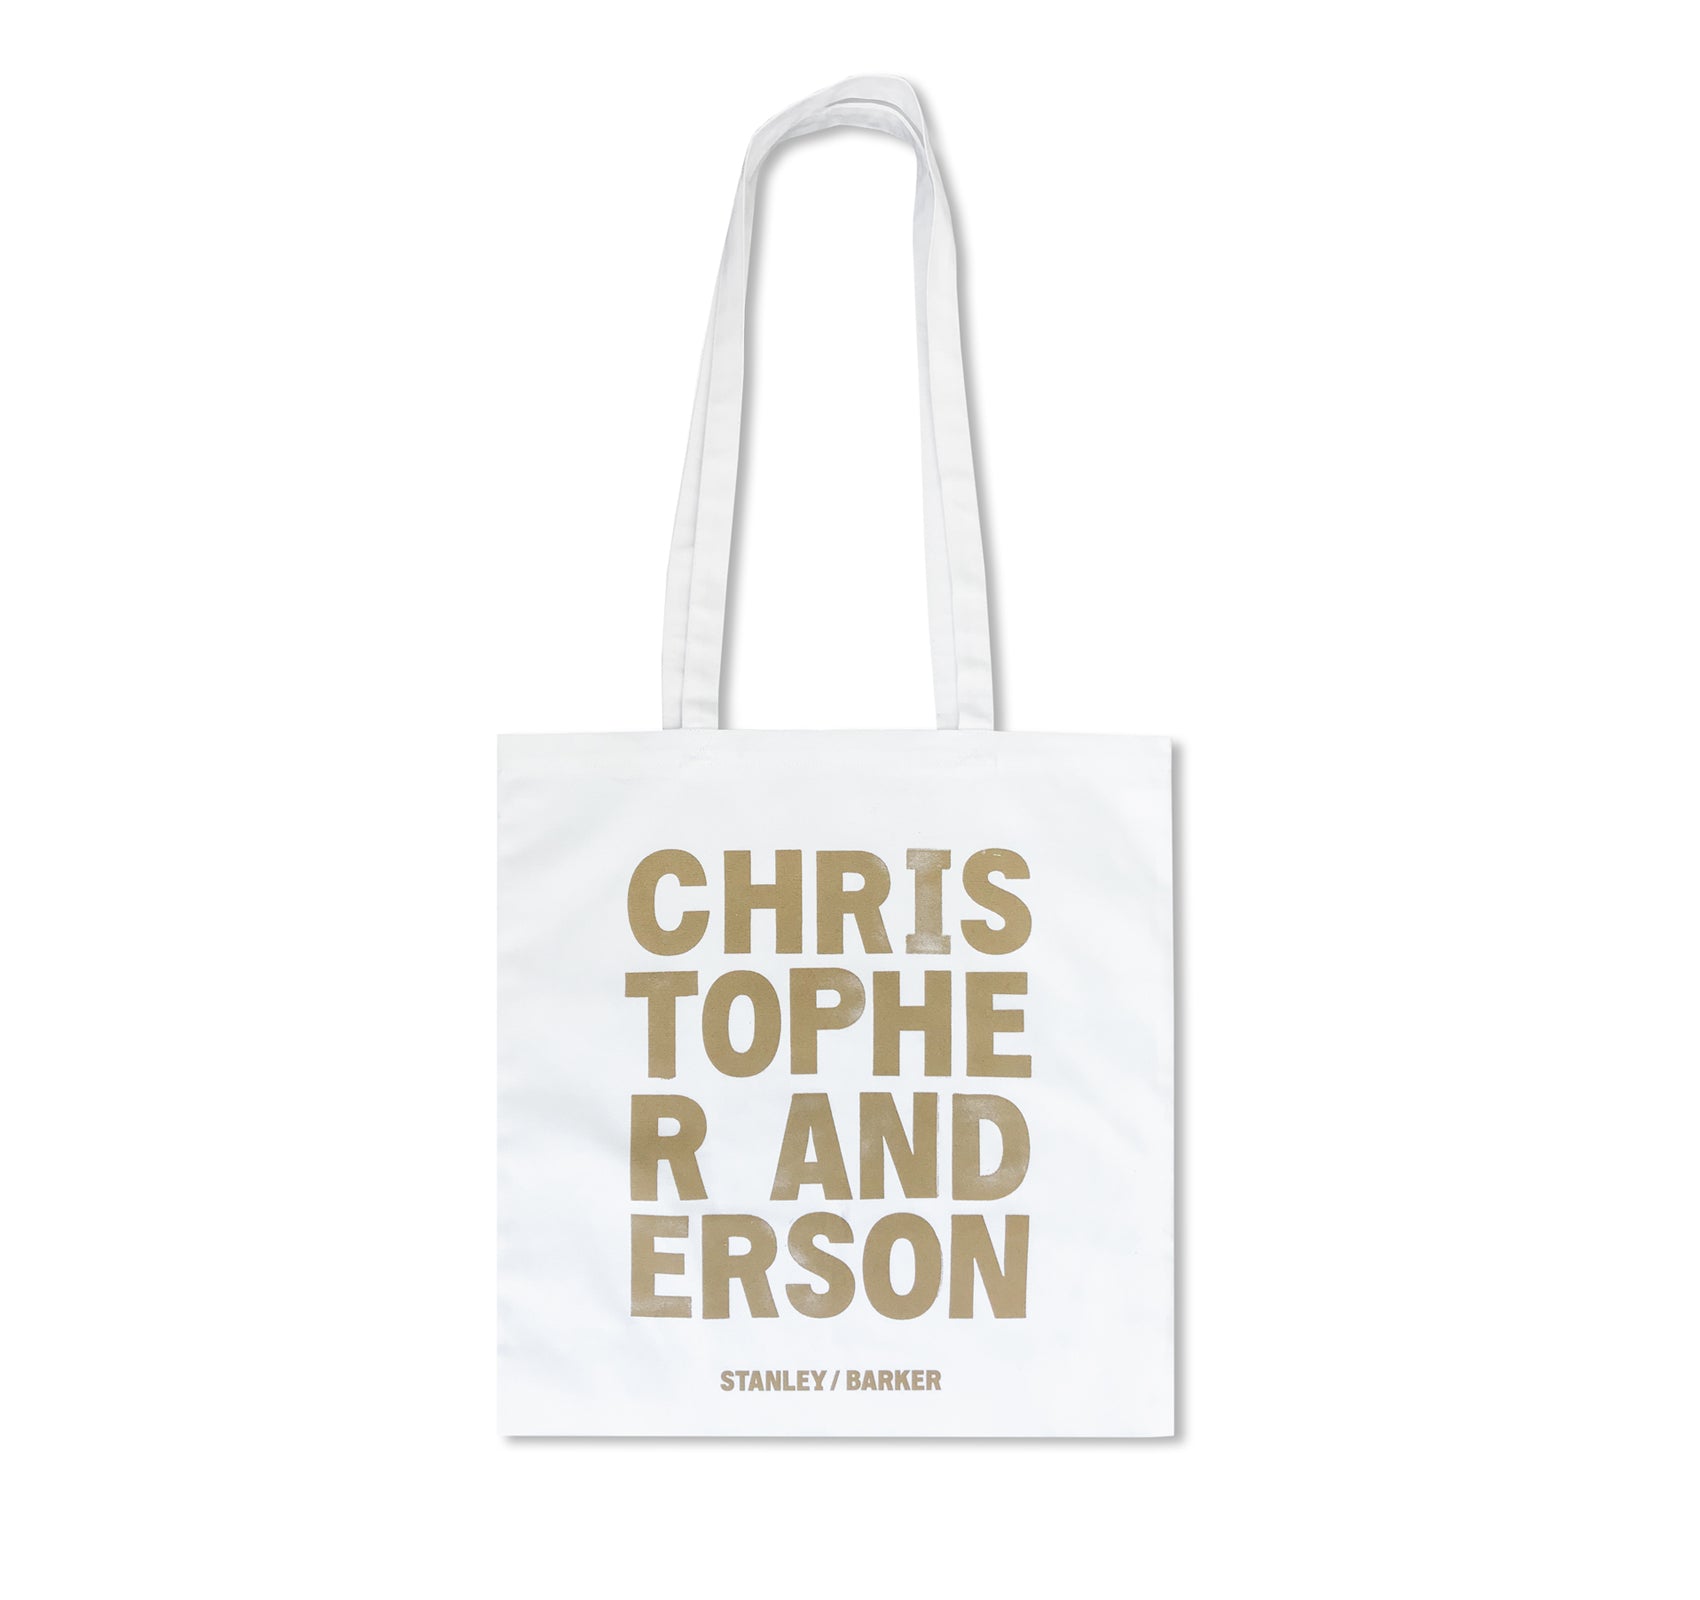 REN TOTE BAG by Christopher Anderson